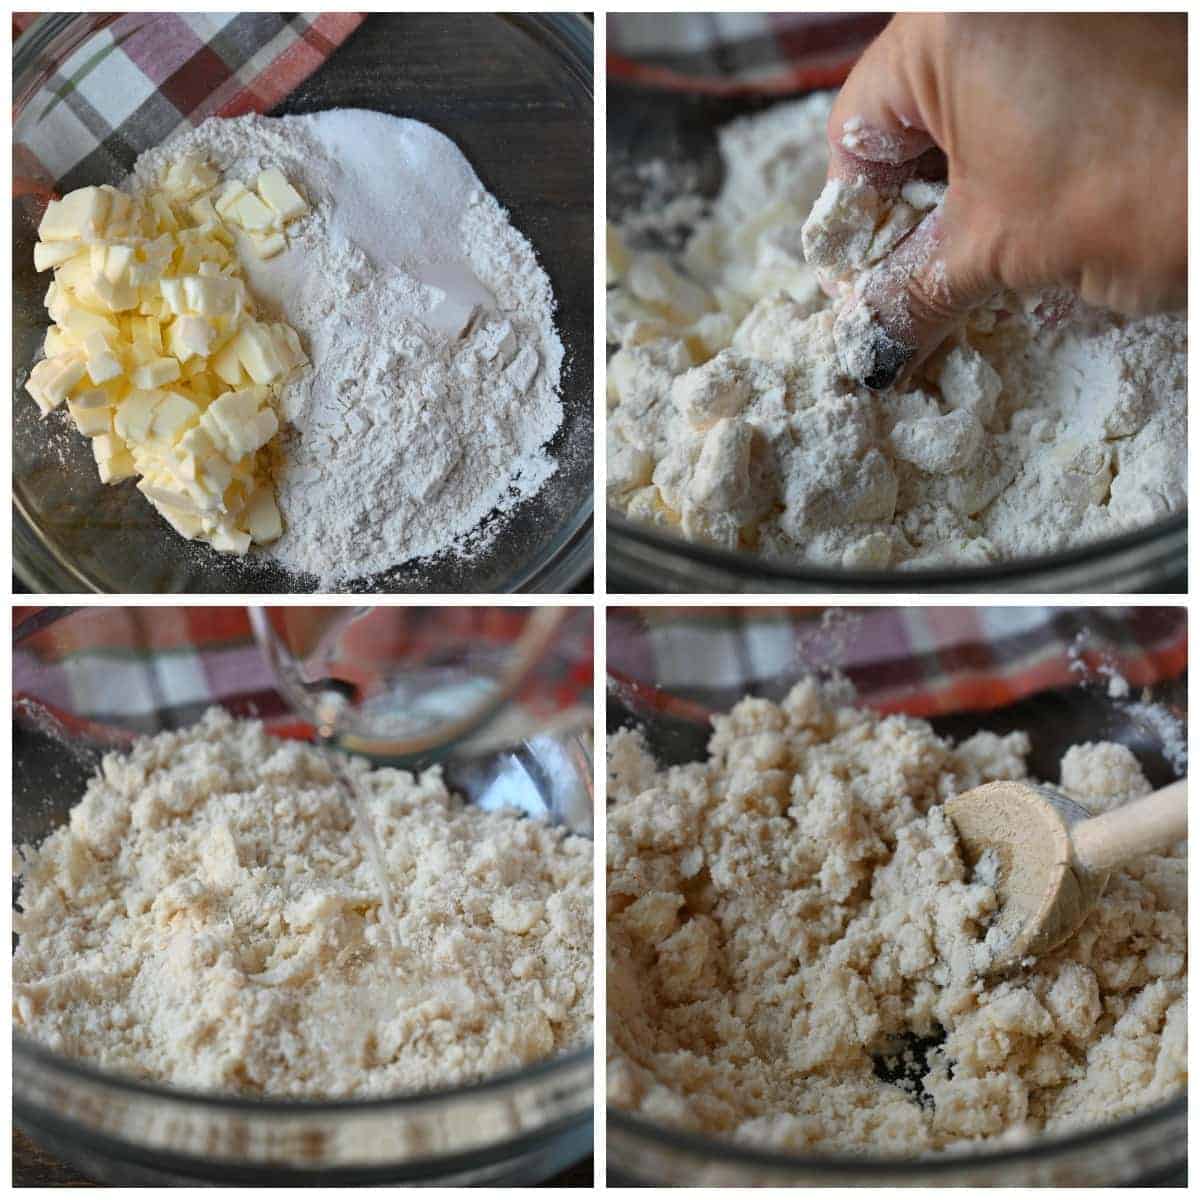 Four process photos. First one, dry ingredients with cold butter chunks. Second one, a hand mixing the cold butter and dry ingredients. Third one, ingredients all mixed up. Fourth one, cold water being poured into the mixture.